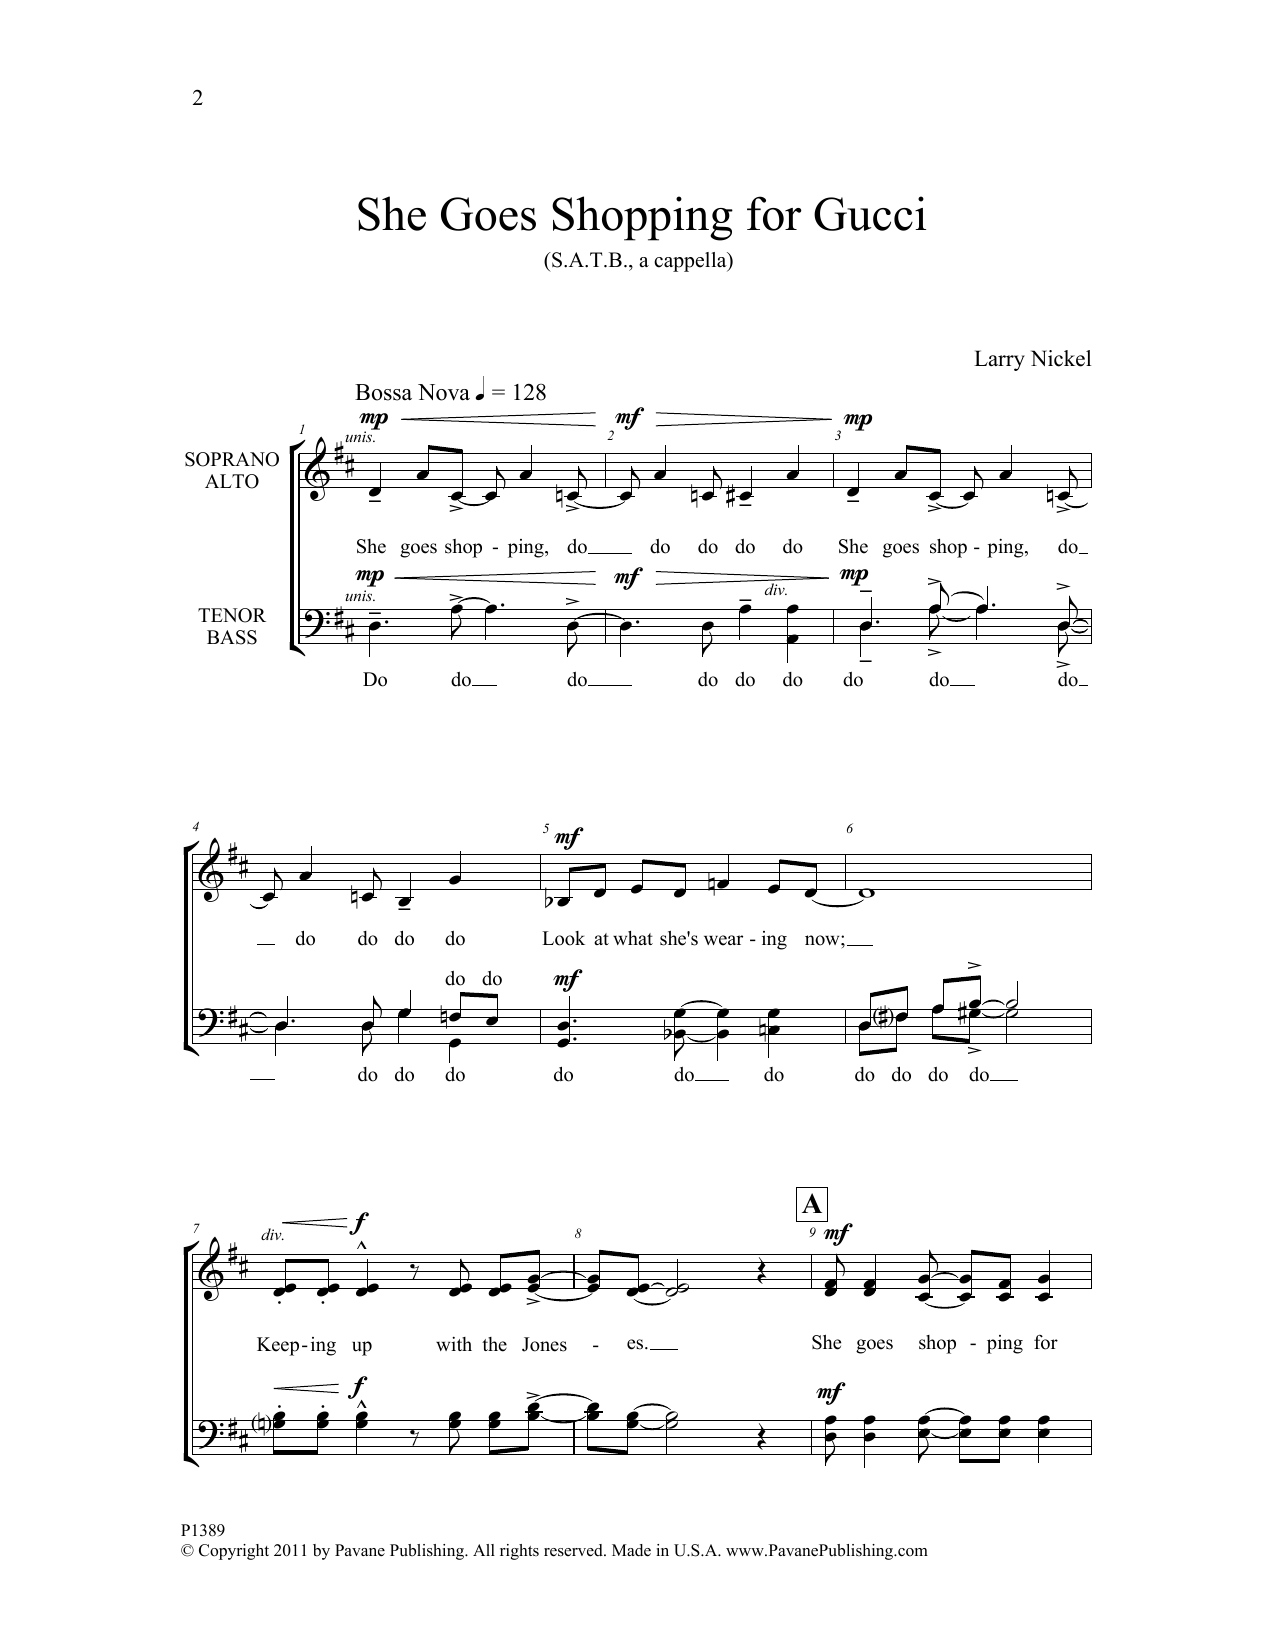 Download Larry Nickel She Goes Shopping for Gucci Sheet Music